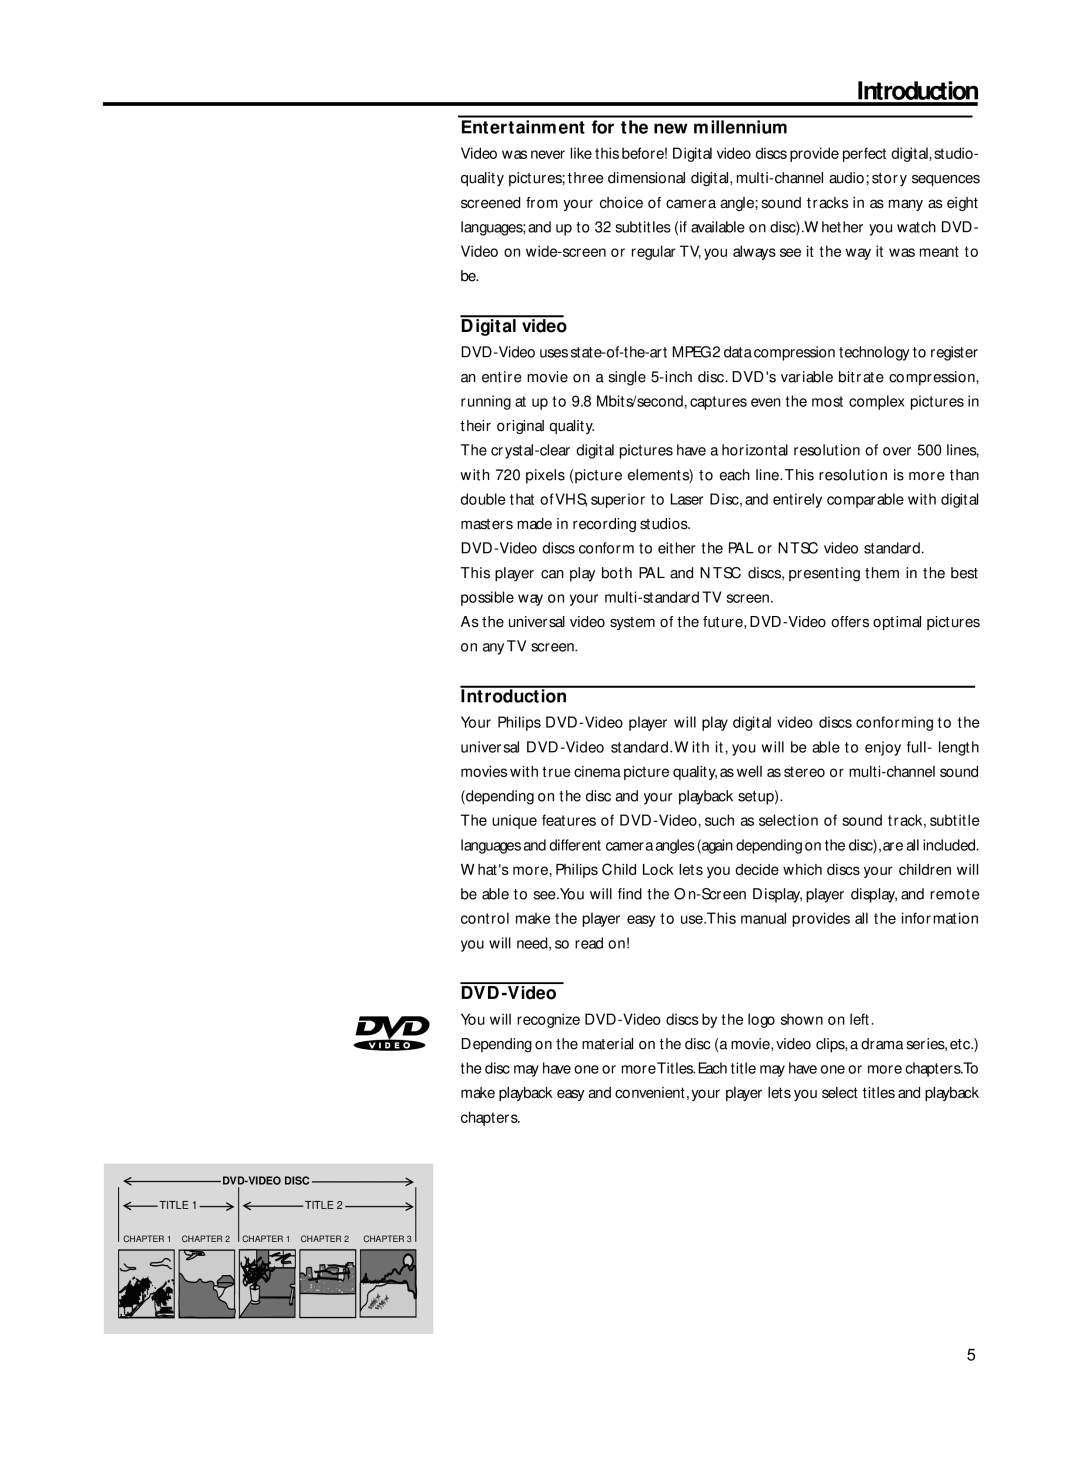 Philips DVD762K manual Entertainment for the new millennium, Digital video, DVD-Video 